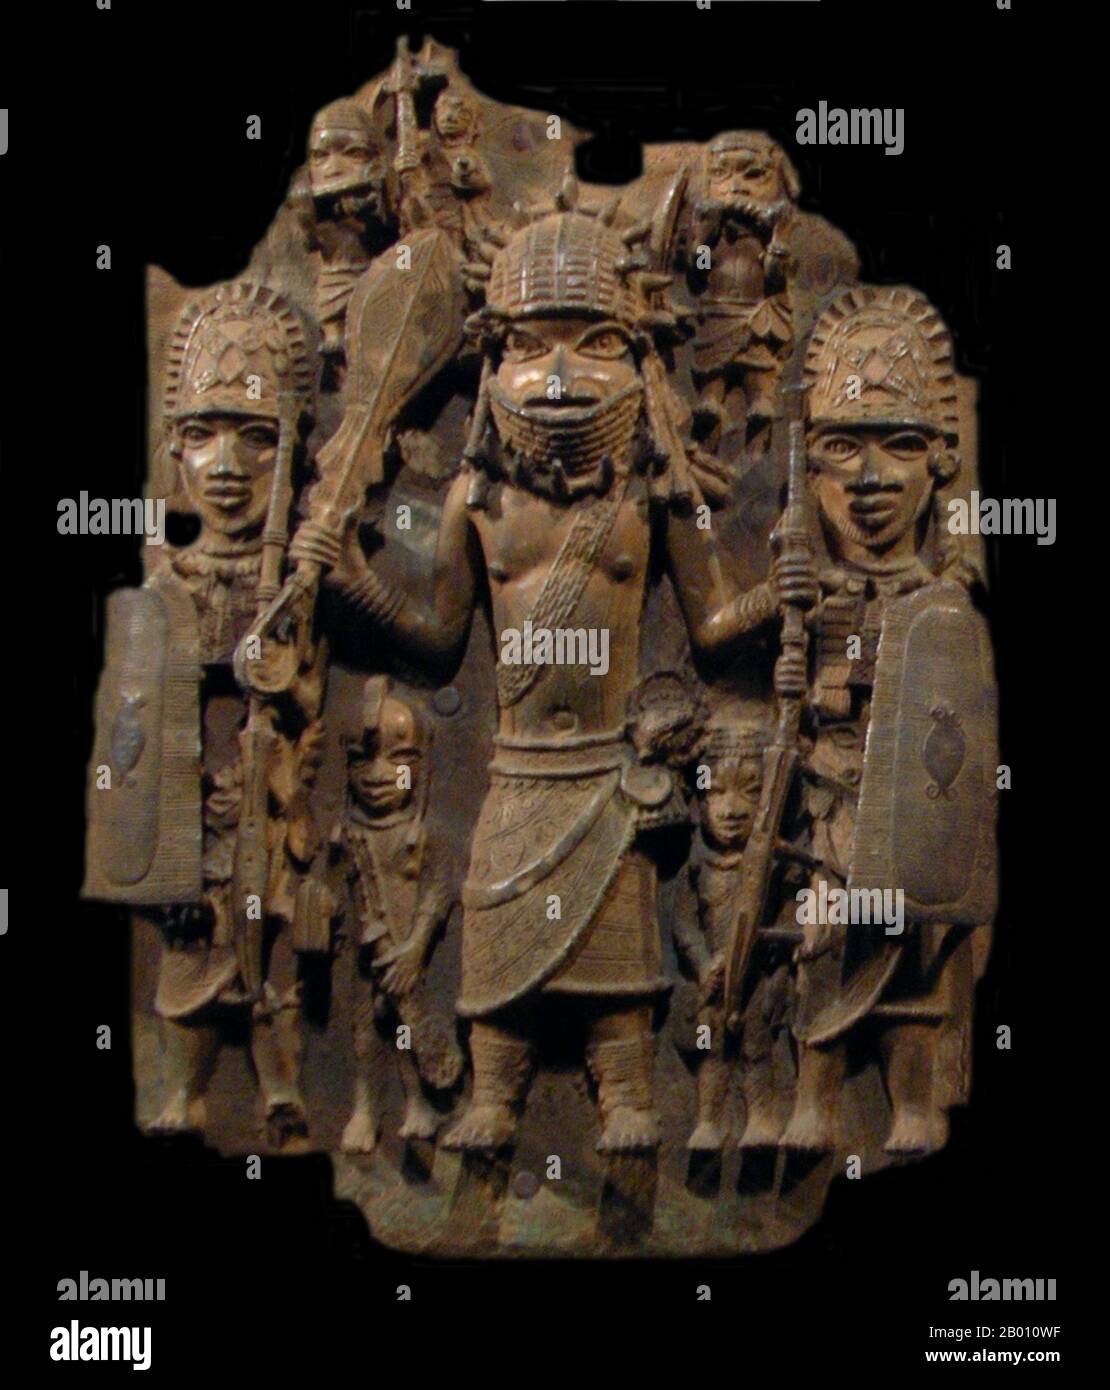 Nigeria: Warrior with two attendants, followers in background. Bronze plaque, Benin Kingdom, 16th-18th centuries.  The Benin Empire (1440–1897) was a pre-colonial African state in what is now modern Nigeria. It is not to be confused with the modern-day country called Benin (and formerly called Dahomey). Stock Photo